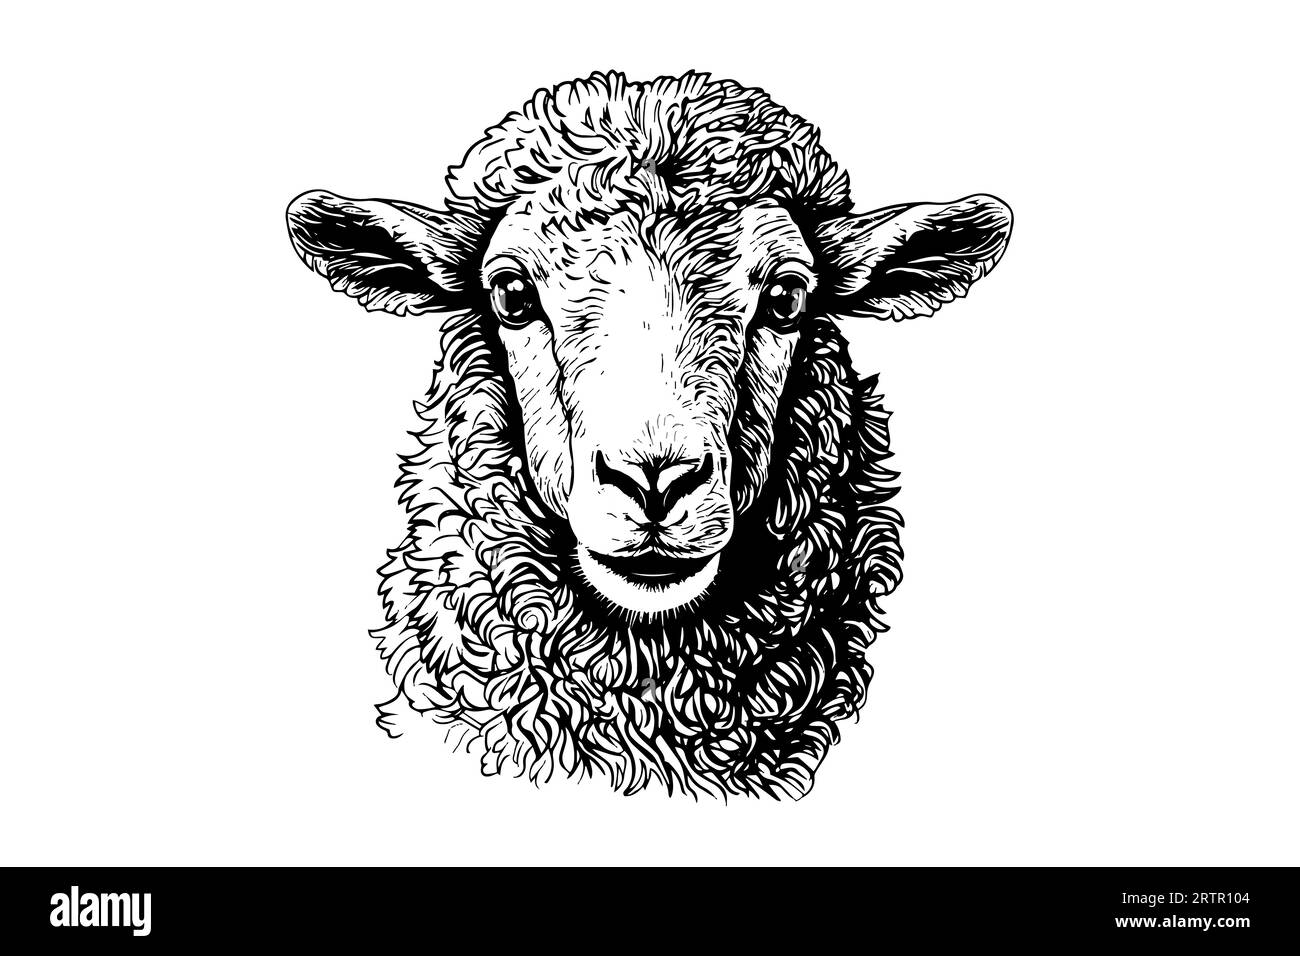 Cute sheep or lamb head engraving style vector illustration. Realistic image. Stock Vector